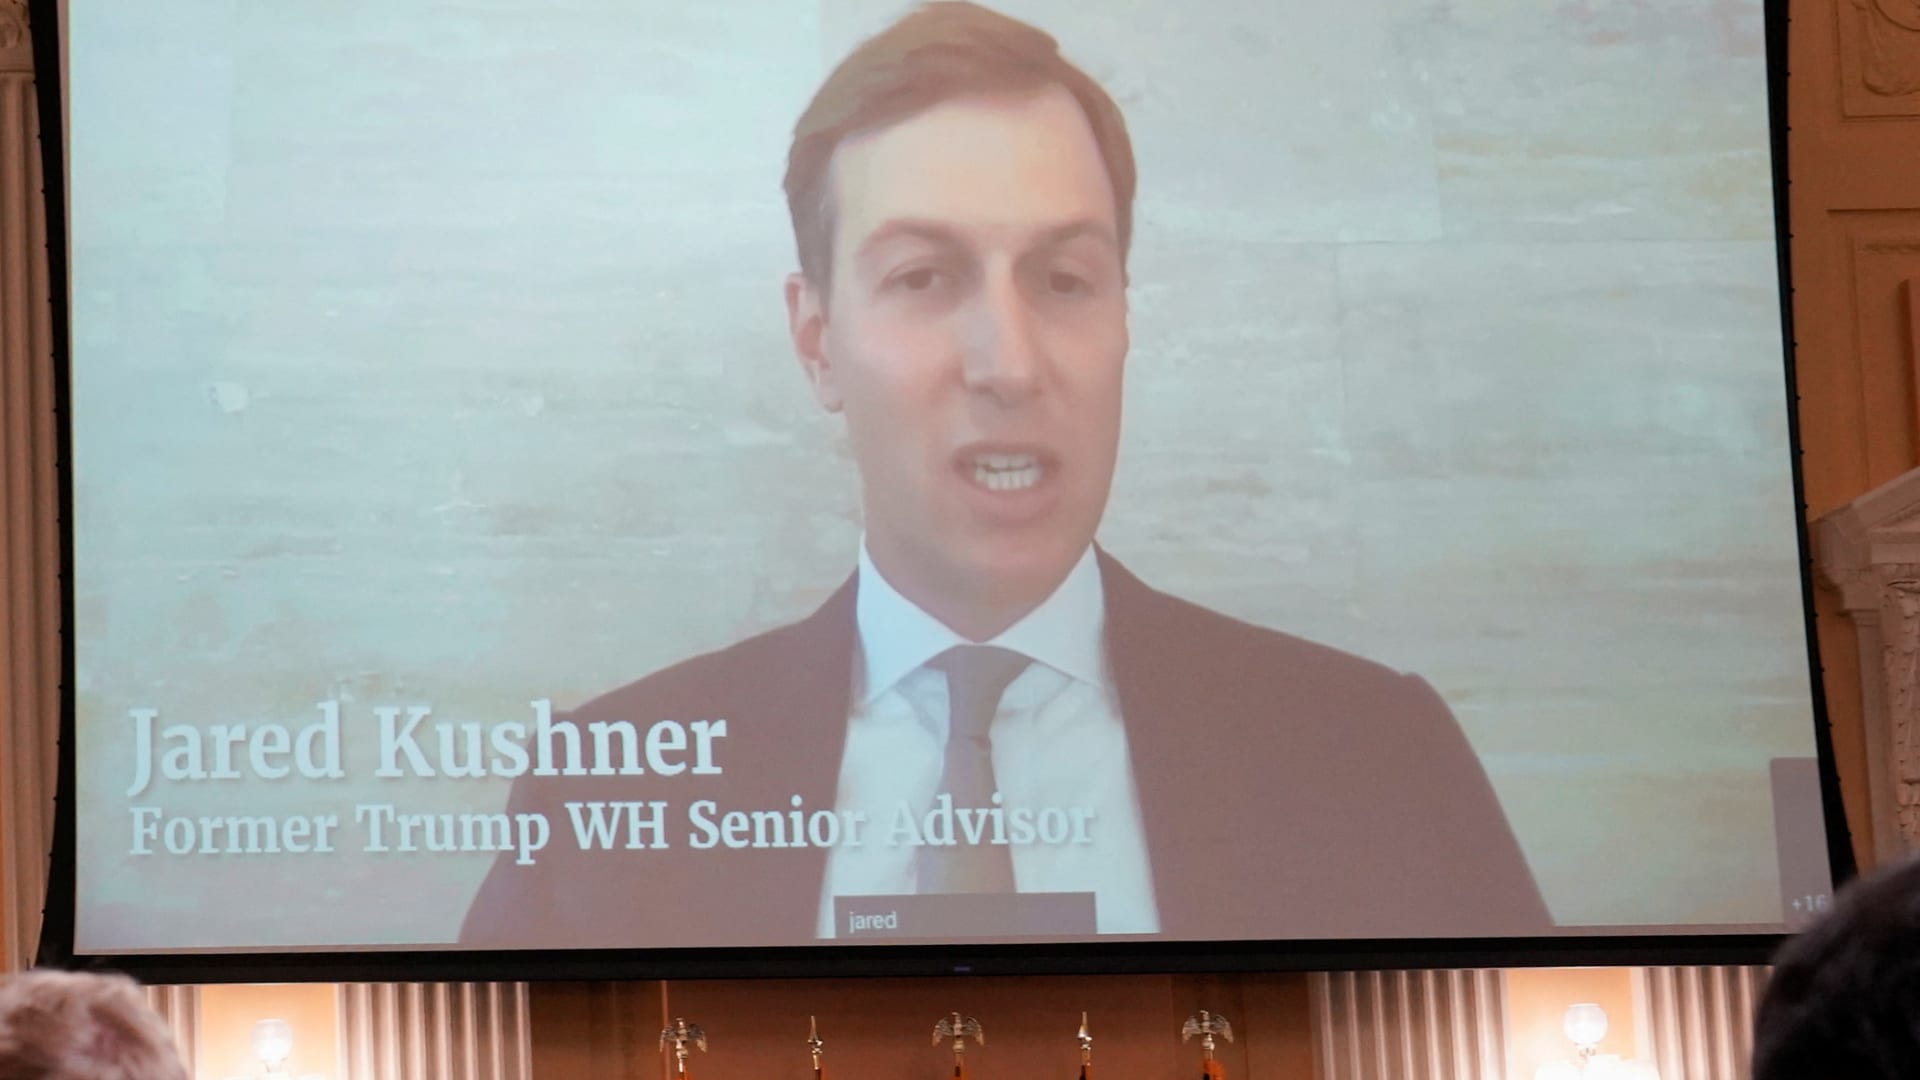 Former White House senior adviser Jared Kushner is seen on video during the hearing of the U.S. House Select Committee to Investigate the January 6 Attack on the United States Capitol, on Capitol Hill in Washington, U.S., June 9, 2022.